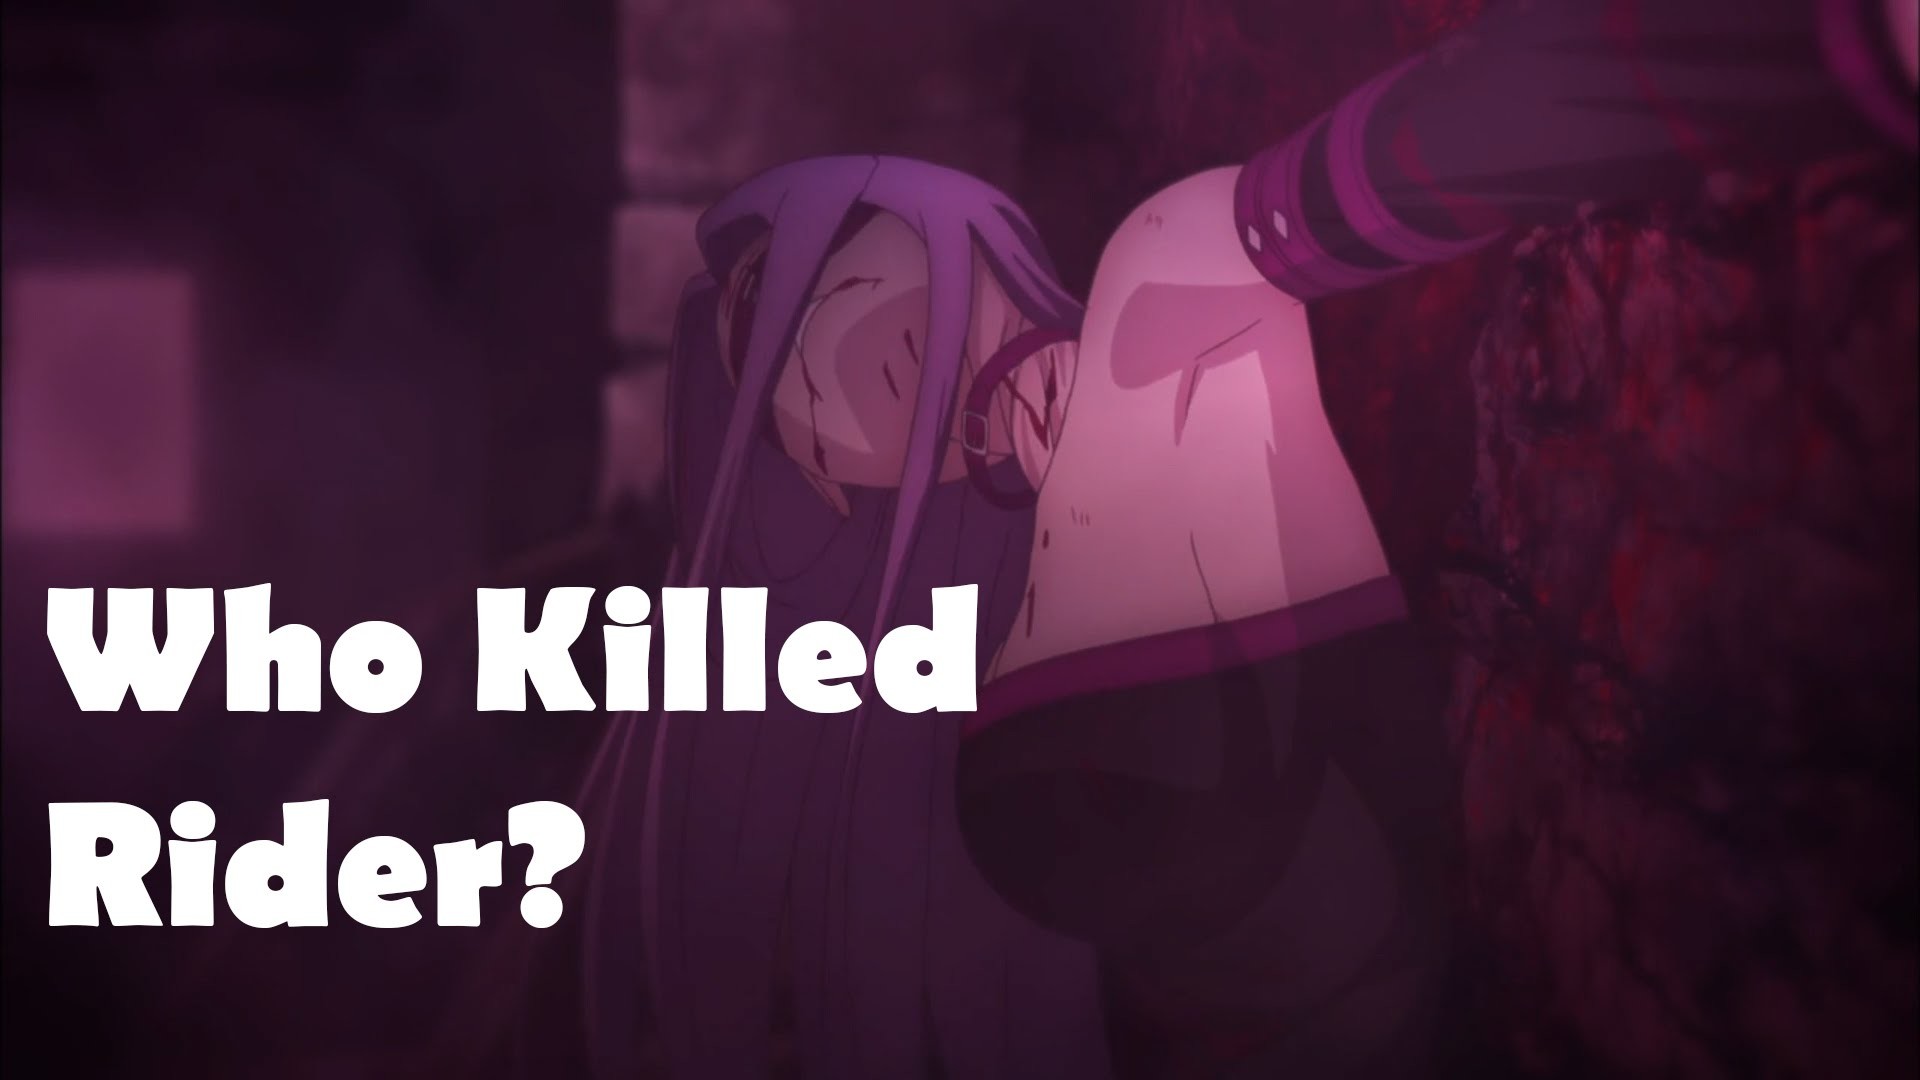 Fate/Stay Night Unlimited Blade Works Episode 8 ãã§ã¤ã/ã¹ãã¤ãã¤ã Anime Review –  Who killed Rider? 2014 – YouTube